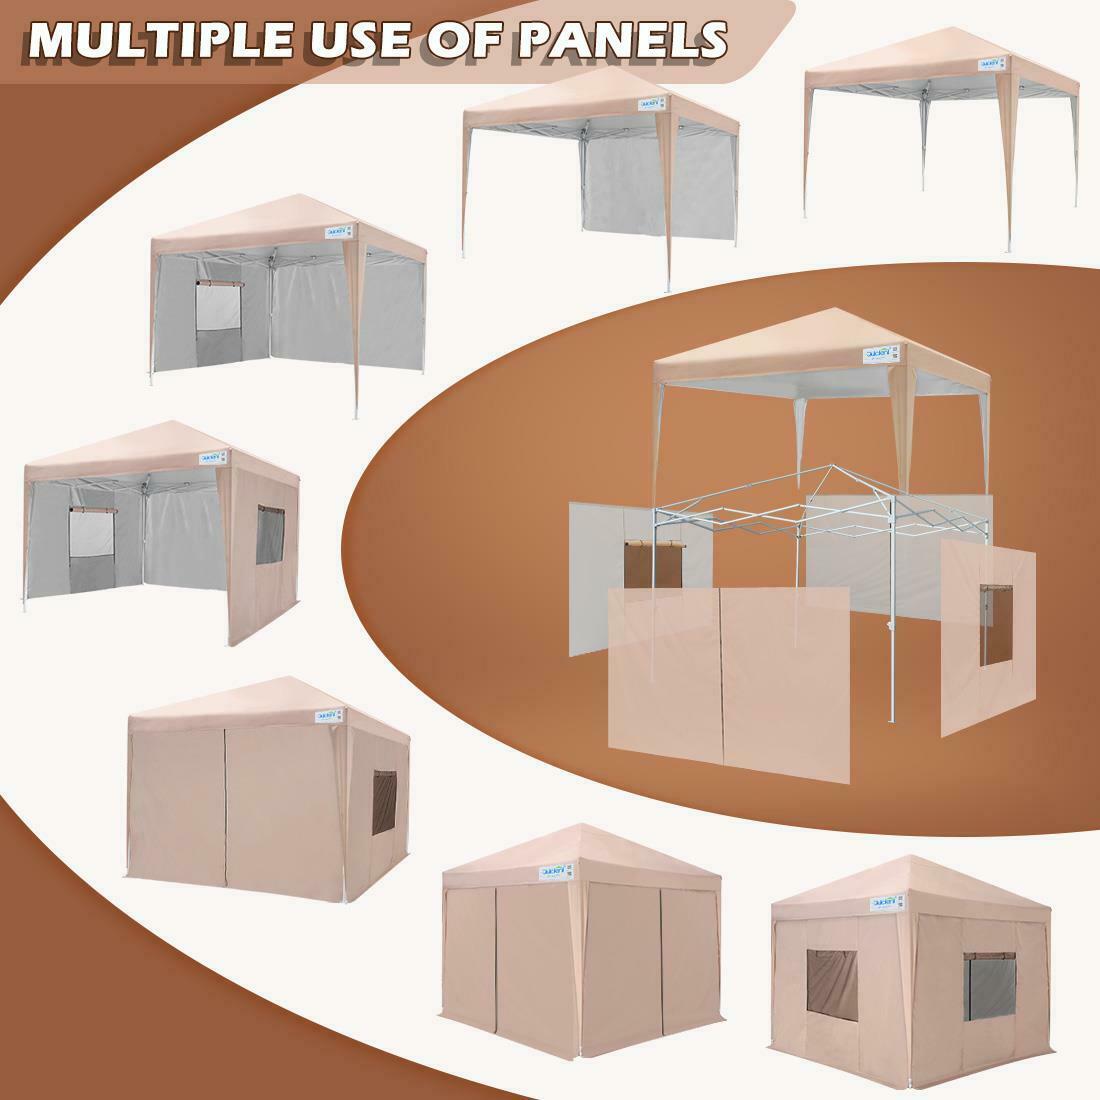 Quictent 8'x8' Wedding Tent - Wedding Pop Up Canopy Tent - Party Tent- Outdoor Folding Gazebo with Bag